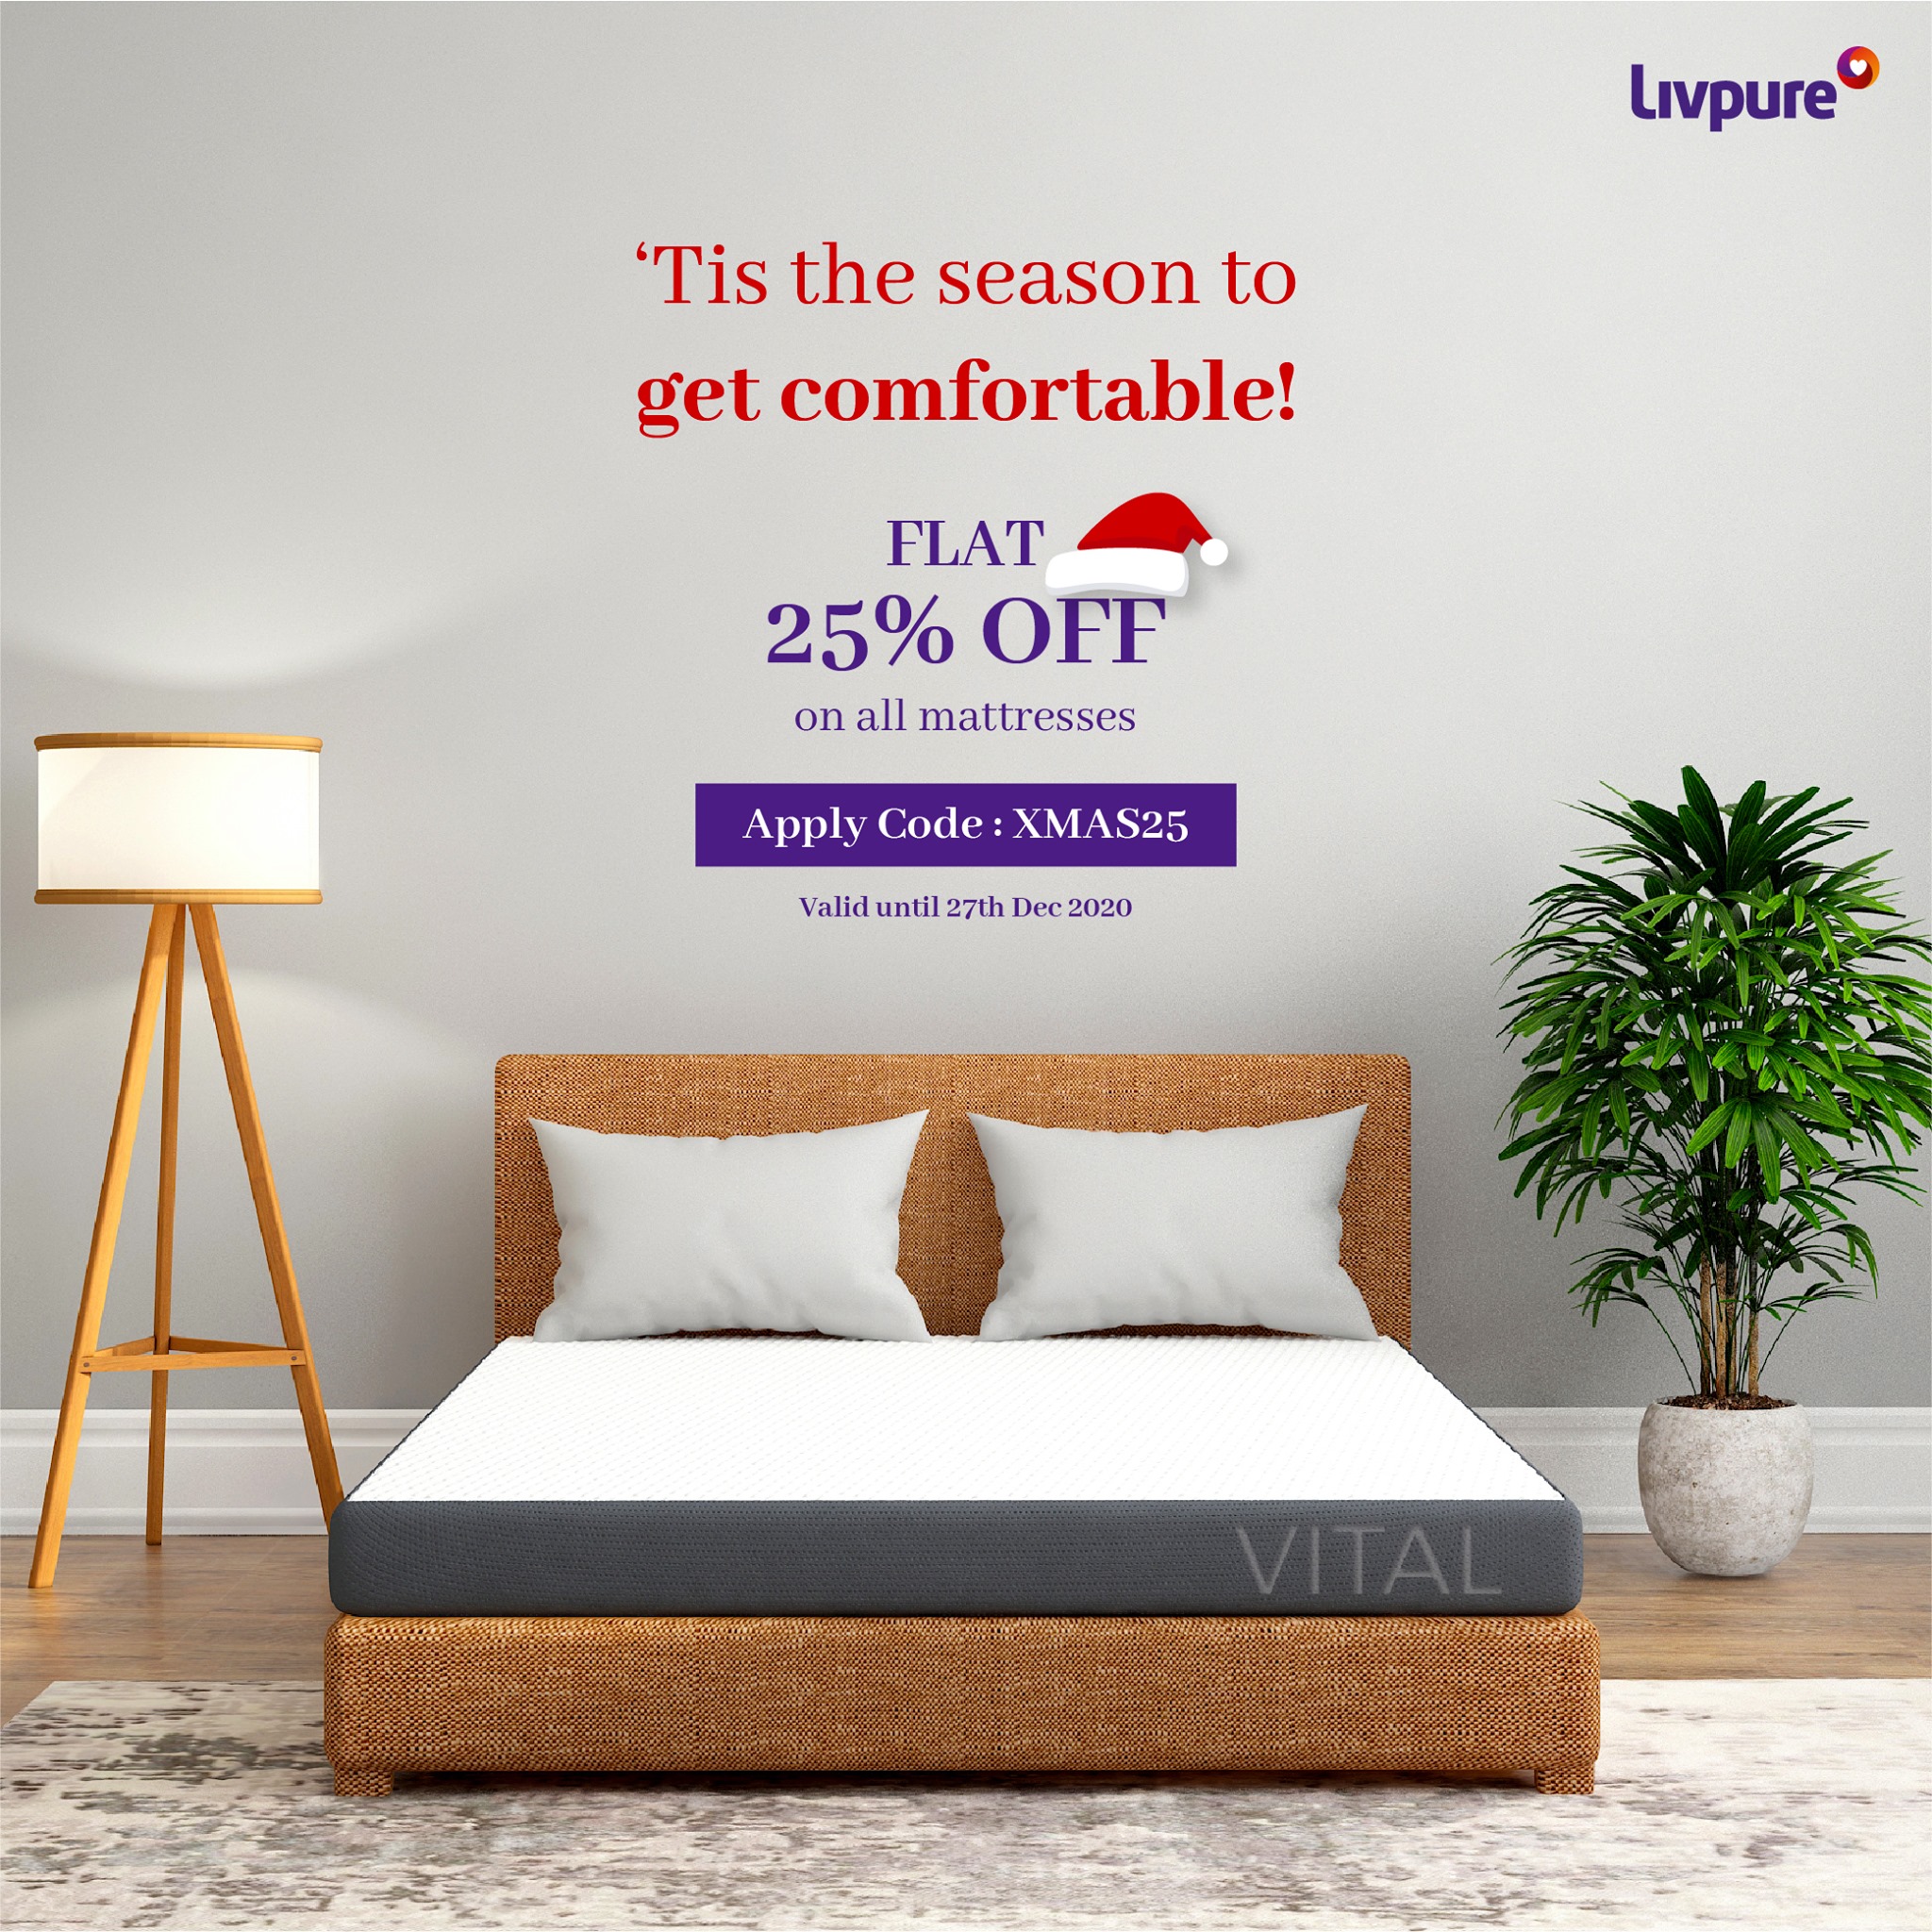 livpure-2020-christmas-sale-flat-discounts-on-all-mattresses-accessories